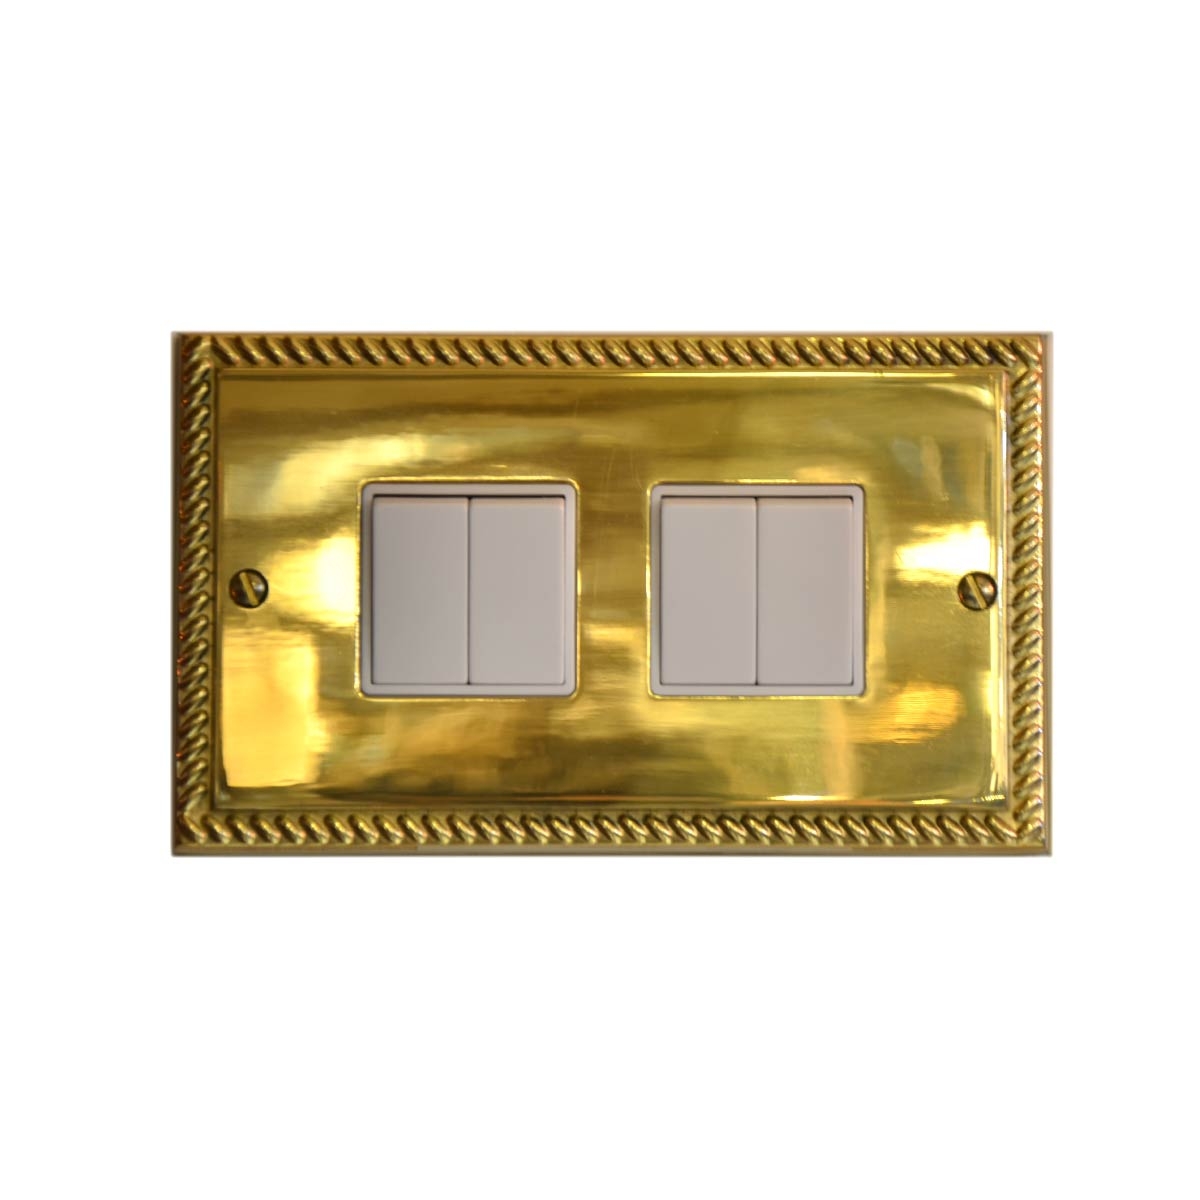 Switch 4Gang 2Way 10Amp T308AB -Brass